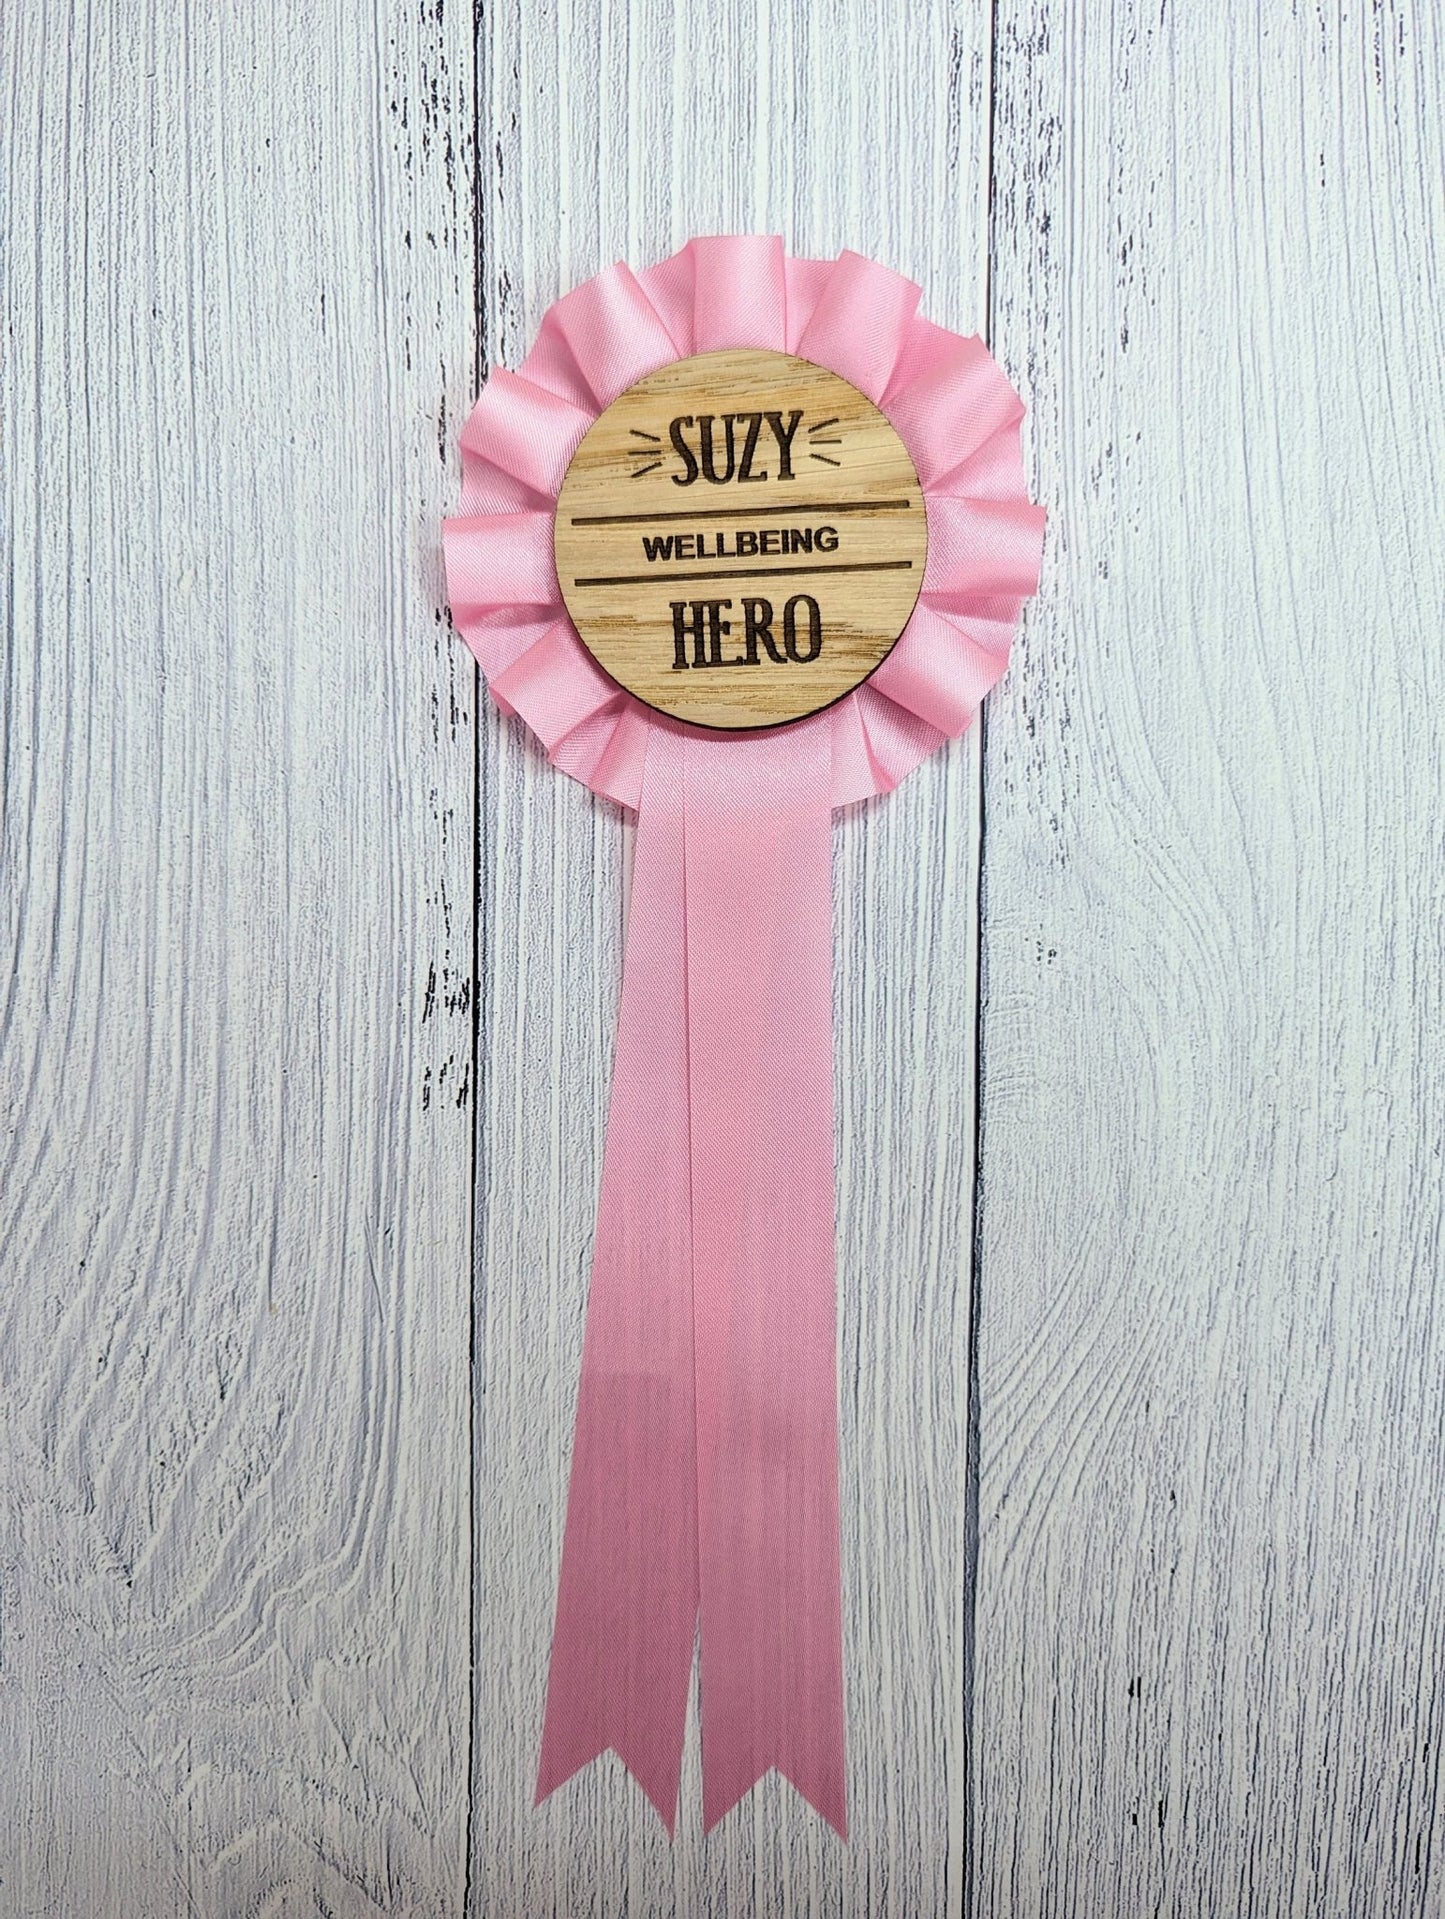 Personalised Employee Recognition Hero Rosette - Celebrate Your Heroes! | Wooden Rosettes in 4 Colours | Bulk Orders Welcome - CherryGroveCraft